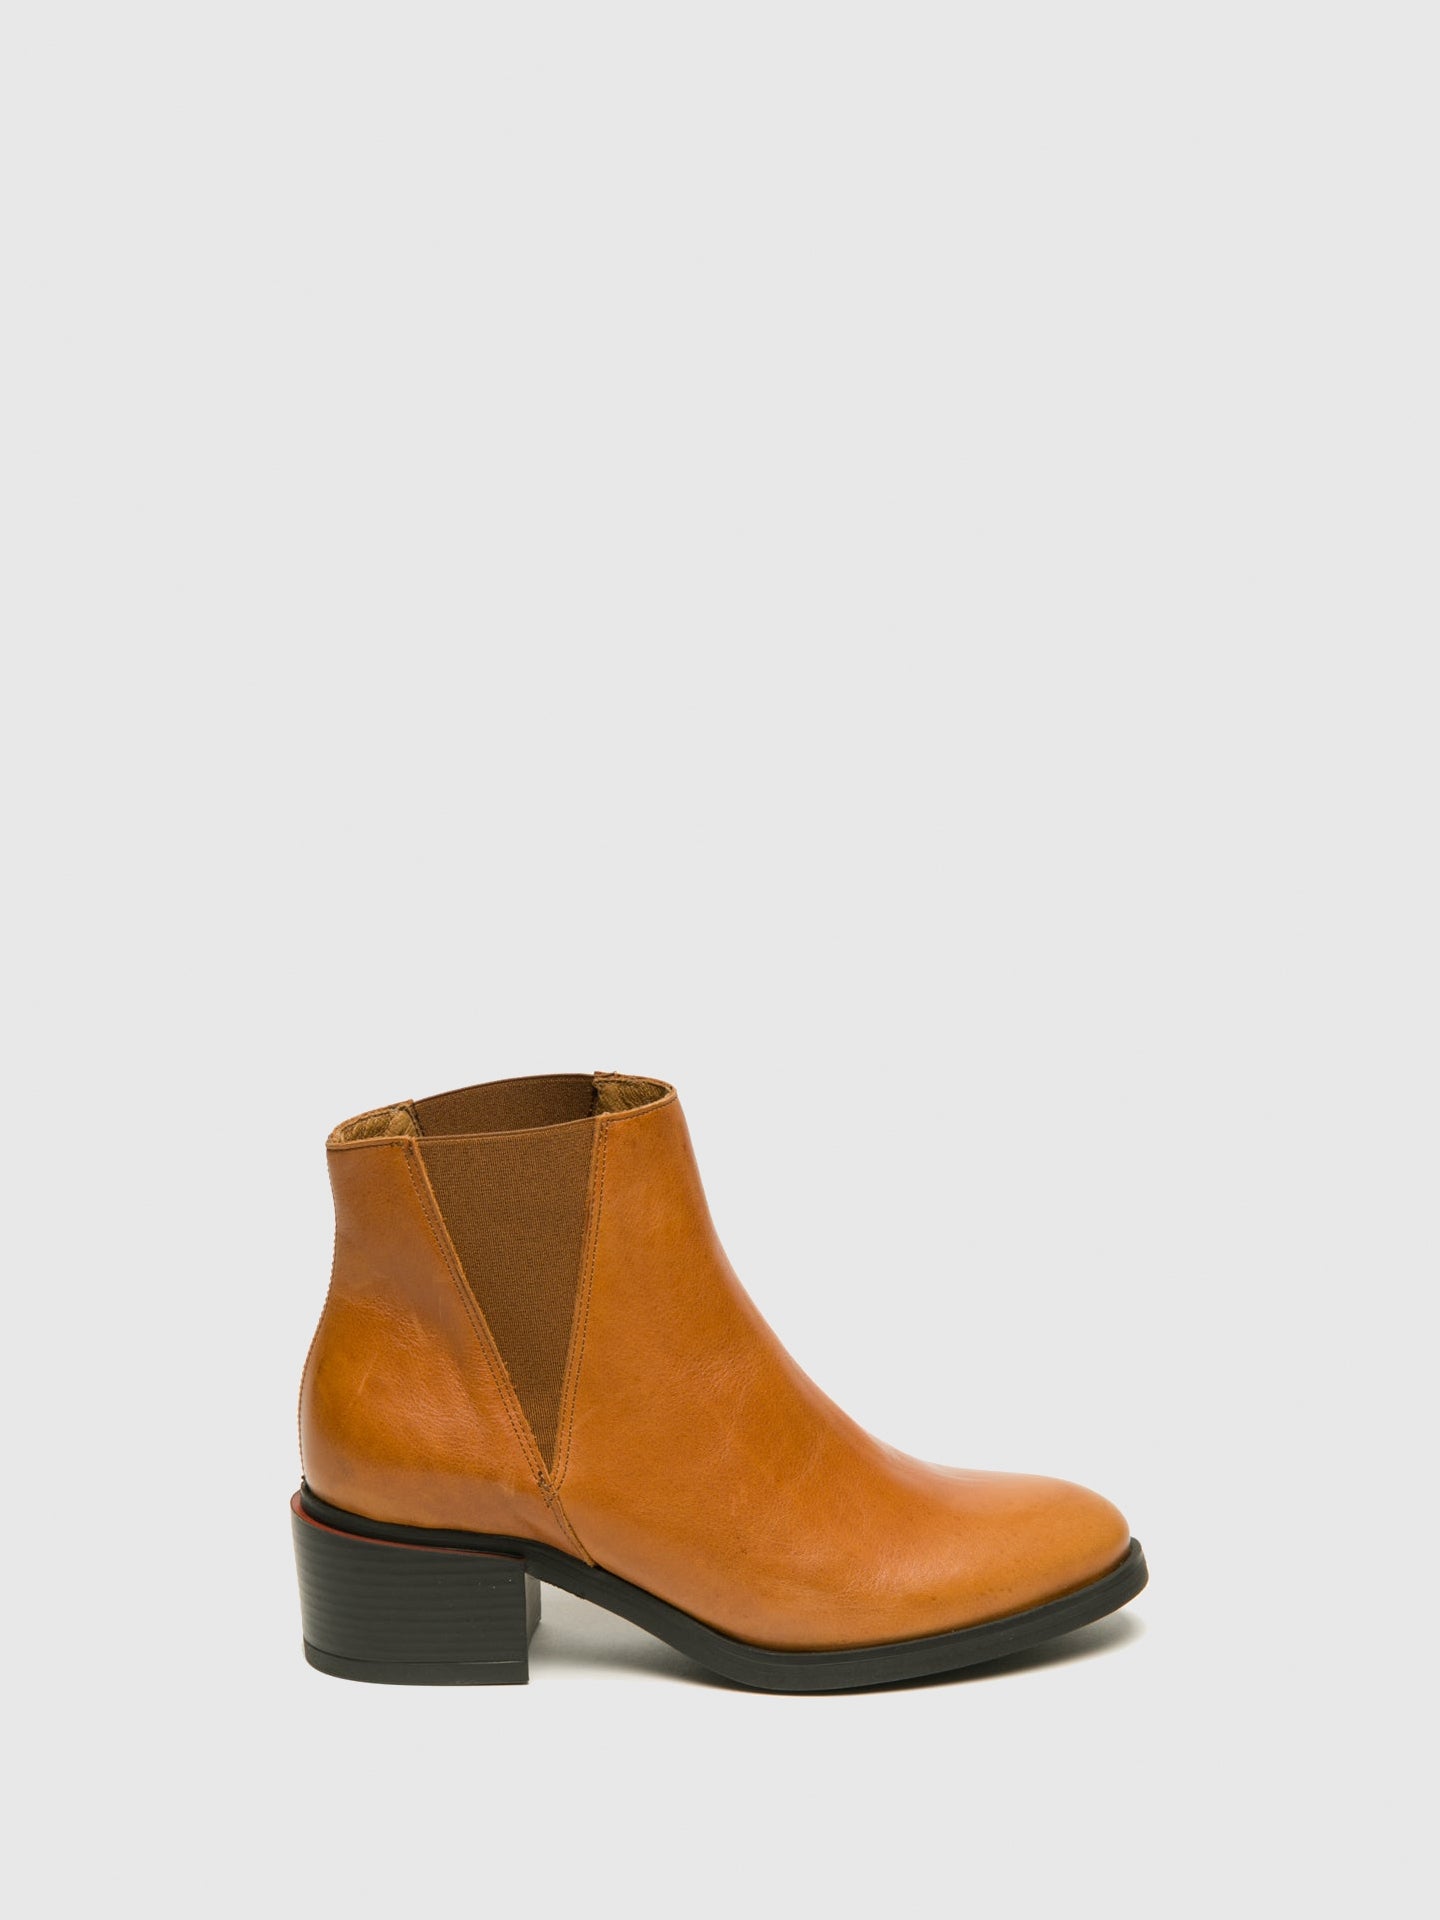 Clay's Peru Round Toe Ankle Boots